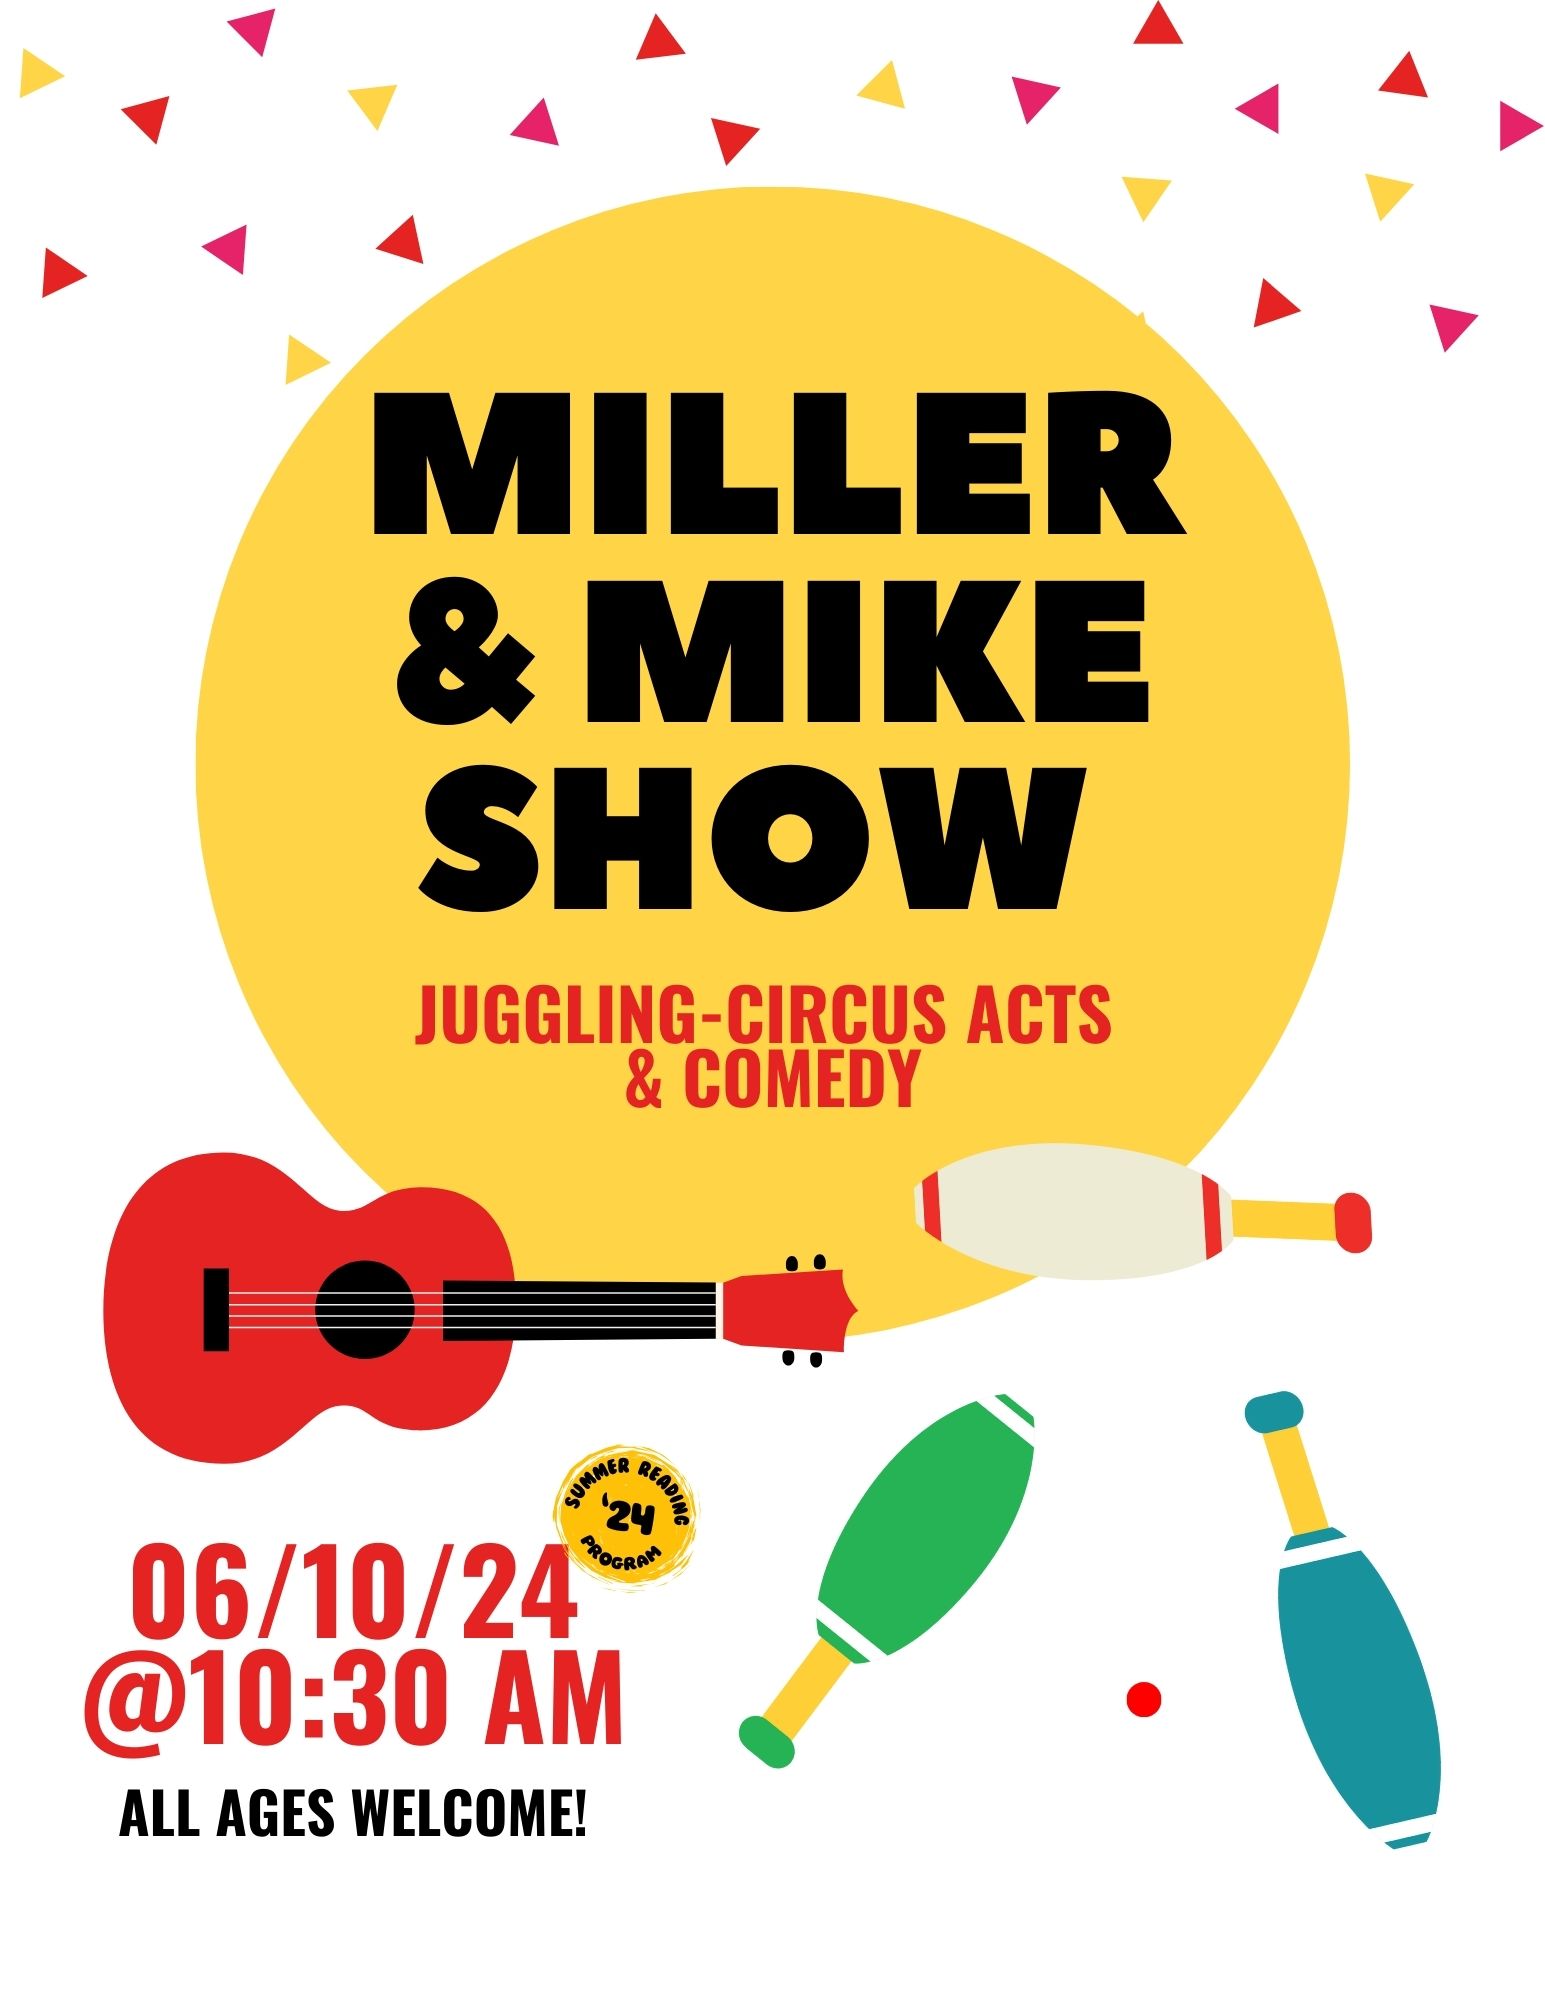 Miller & Mike Show 6/10/24 @ 10:30AM